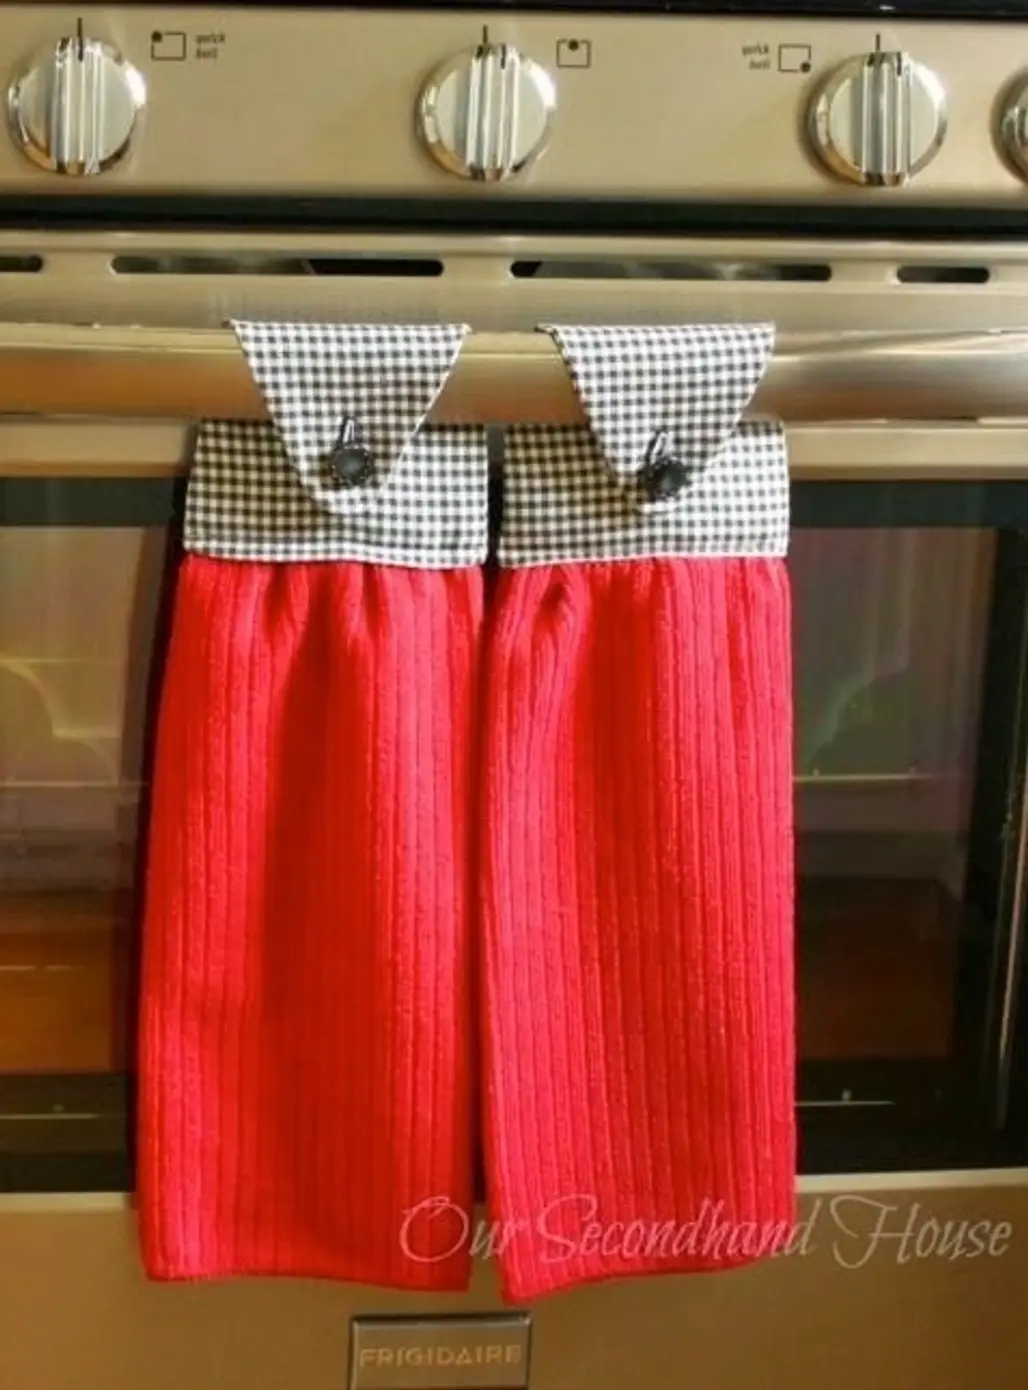 How to Make Hanging Kitchen Towels